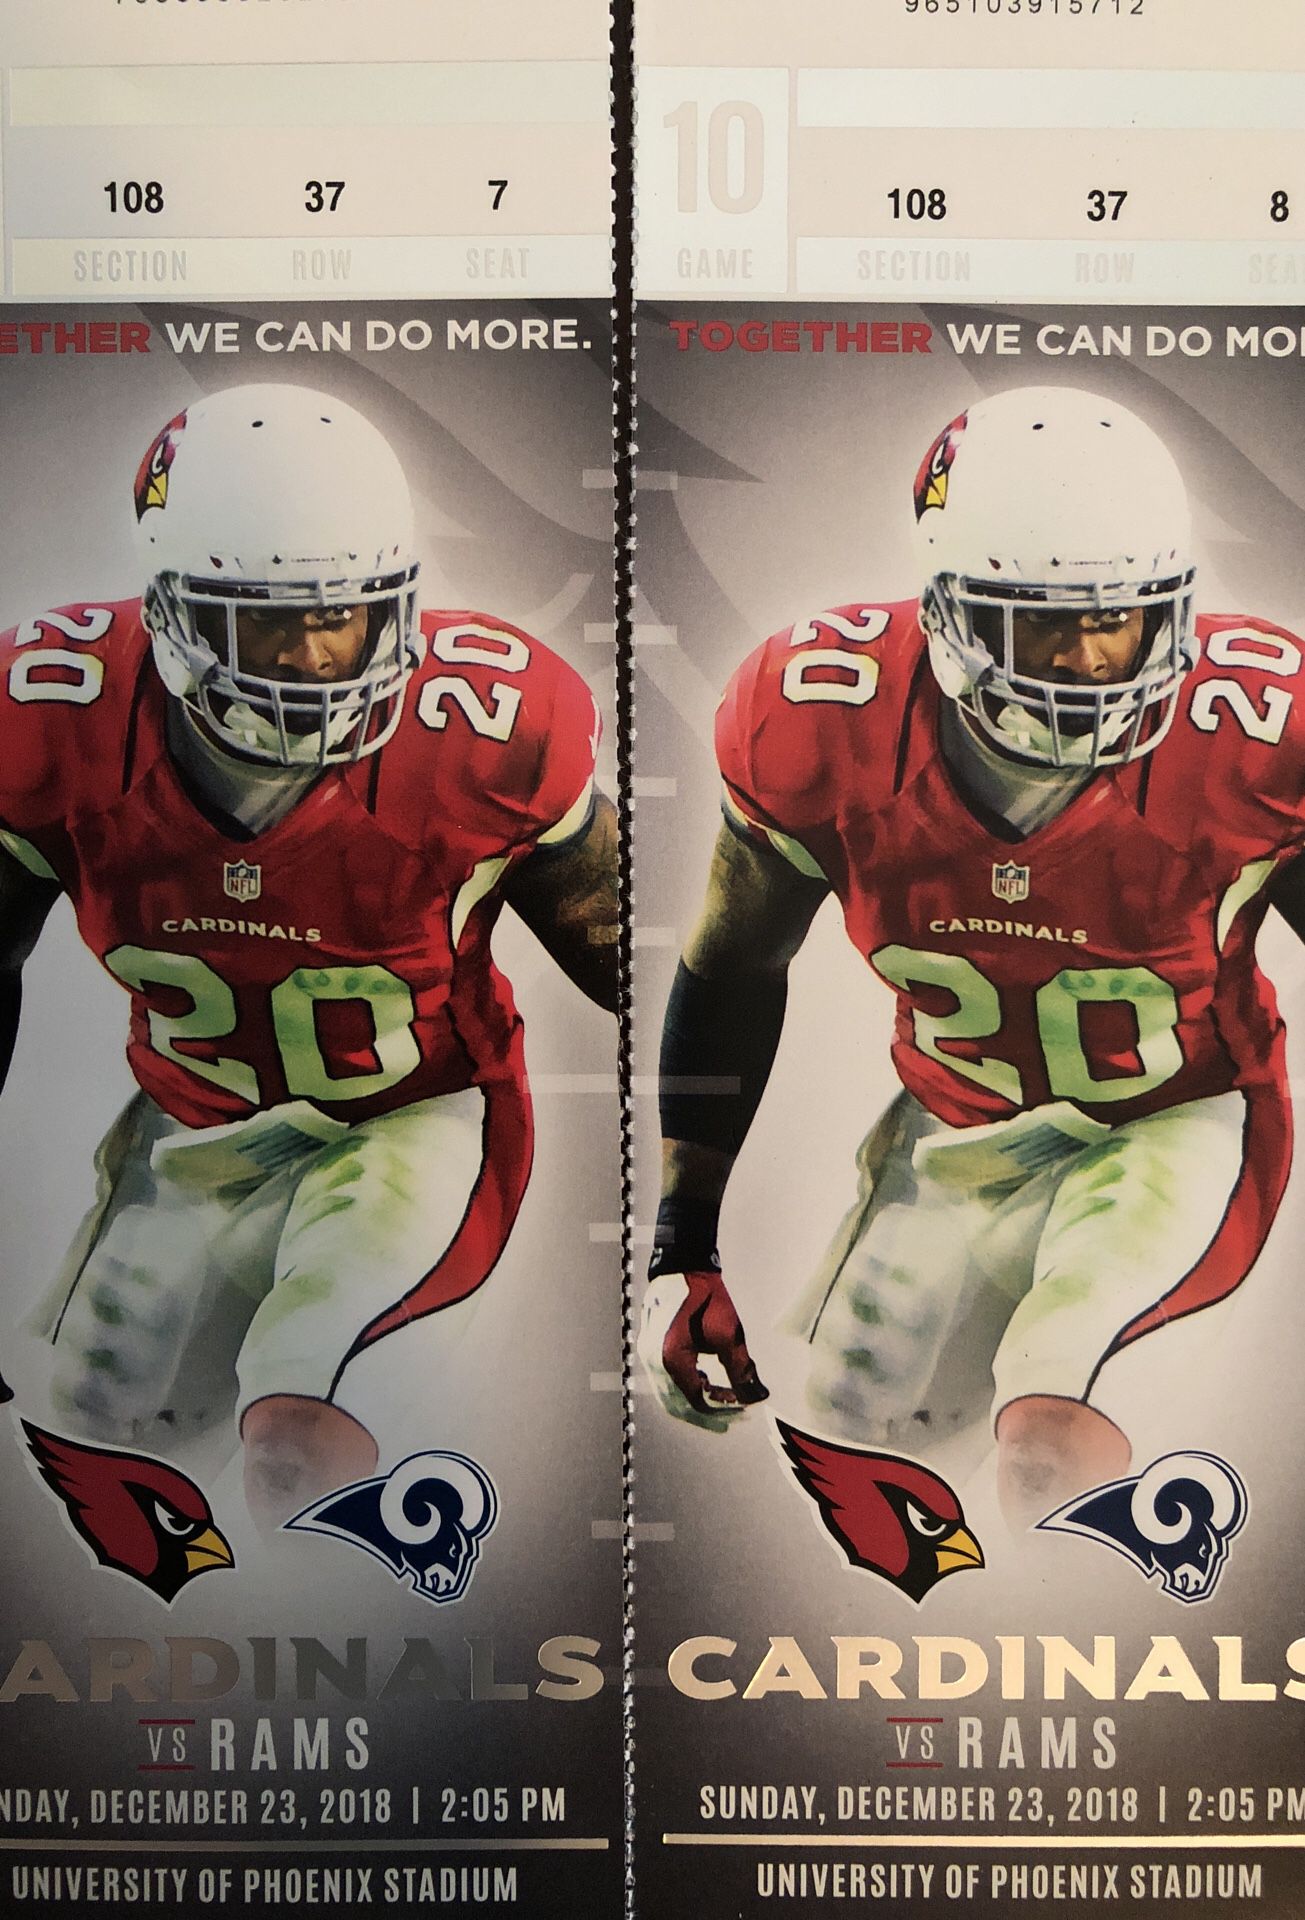 Two Cardinals vs. Rams tickets, December 23rd. Section 108. Great seats!! Parking pass included. $350 OBO